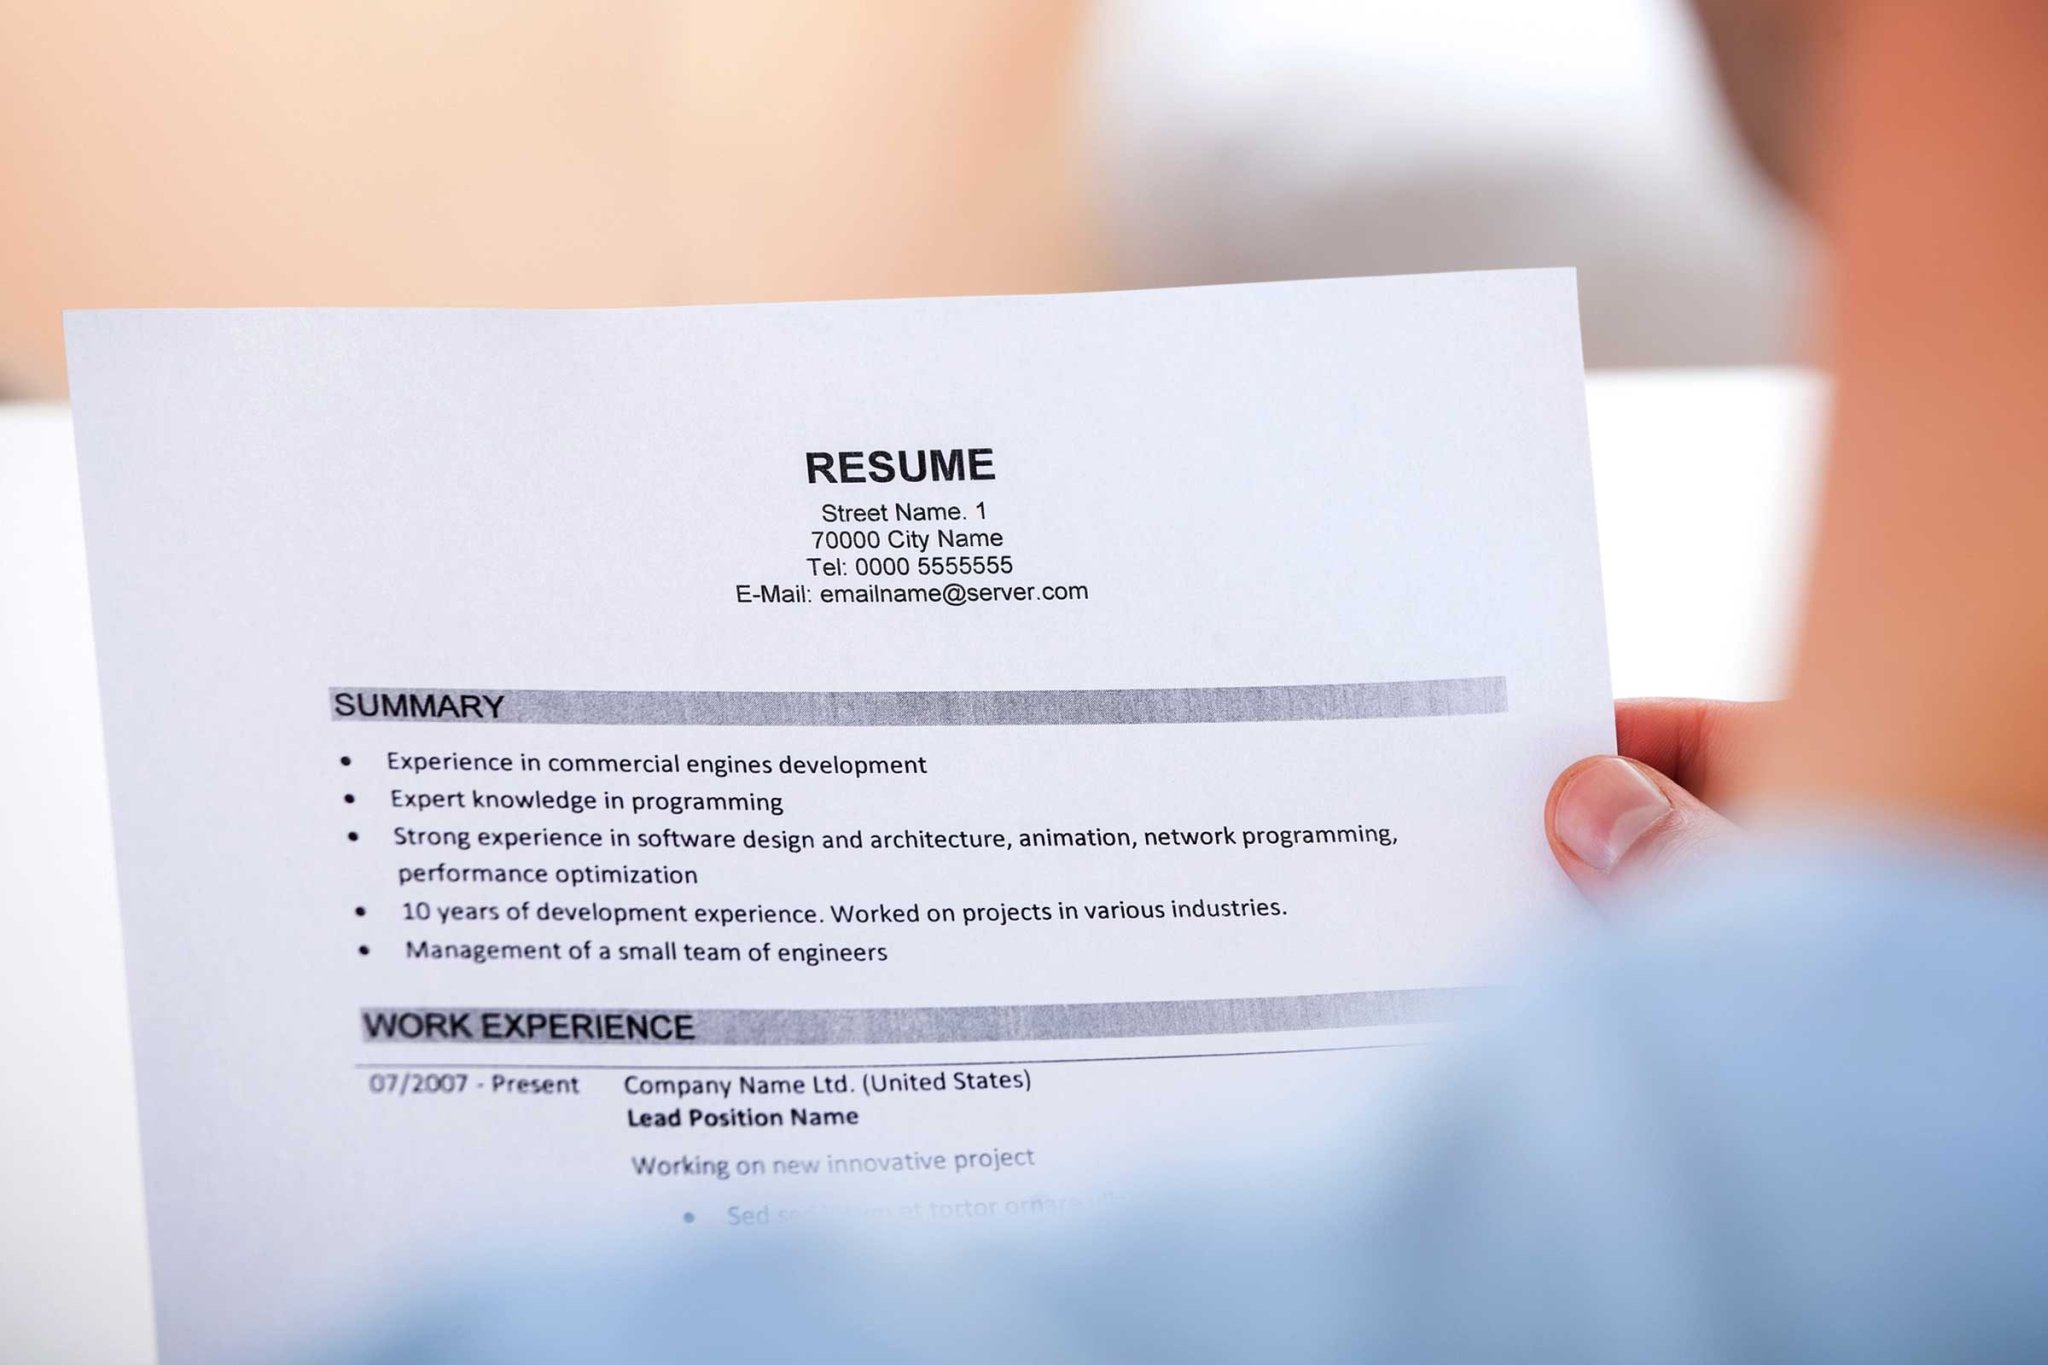 The Best Way to Explain a Resume Gap, According to Top Recruiters